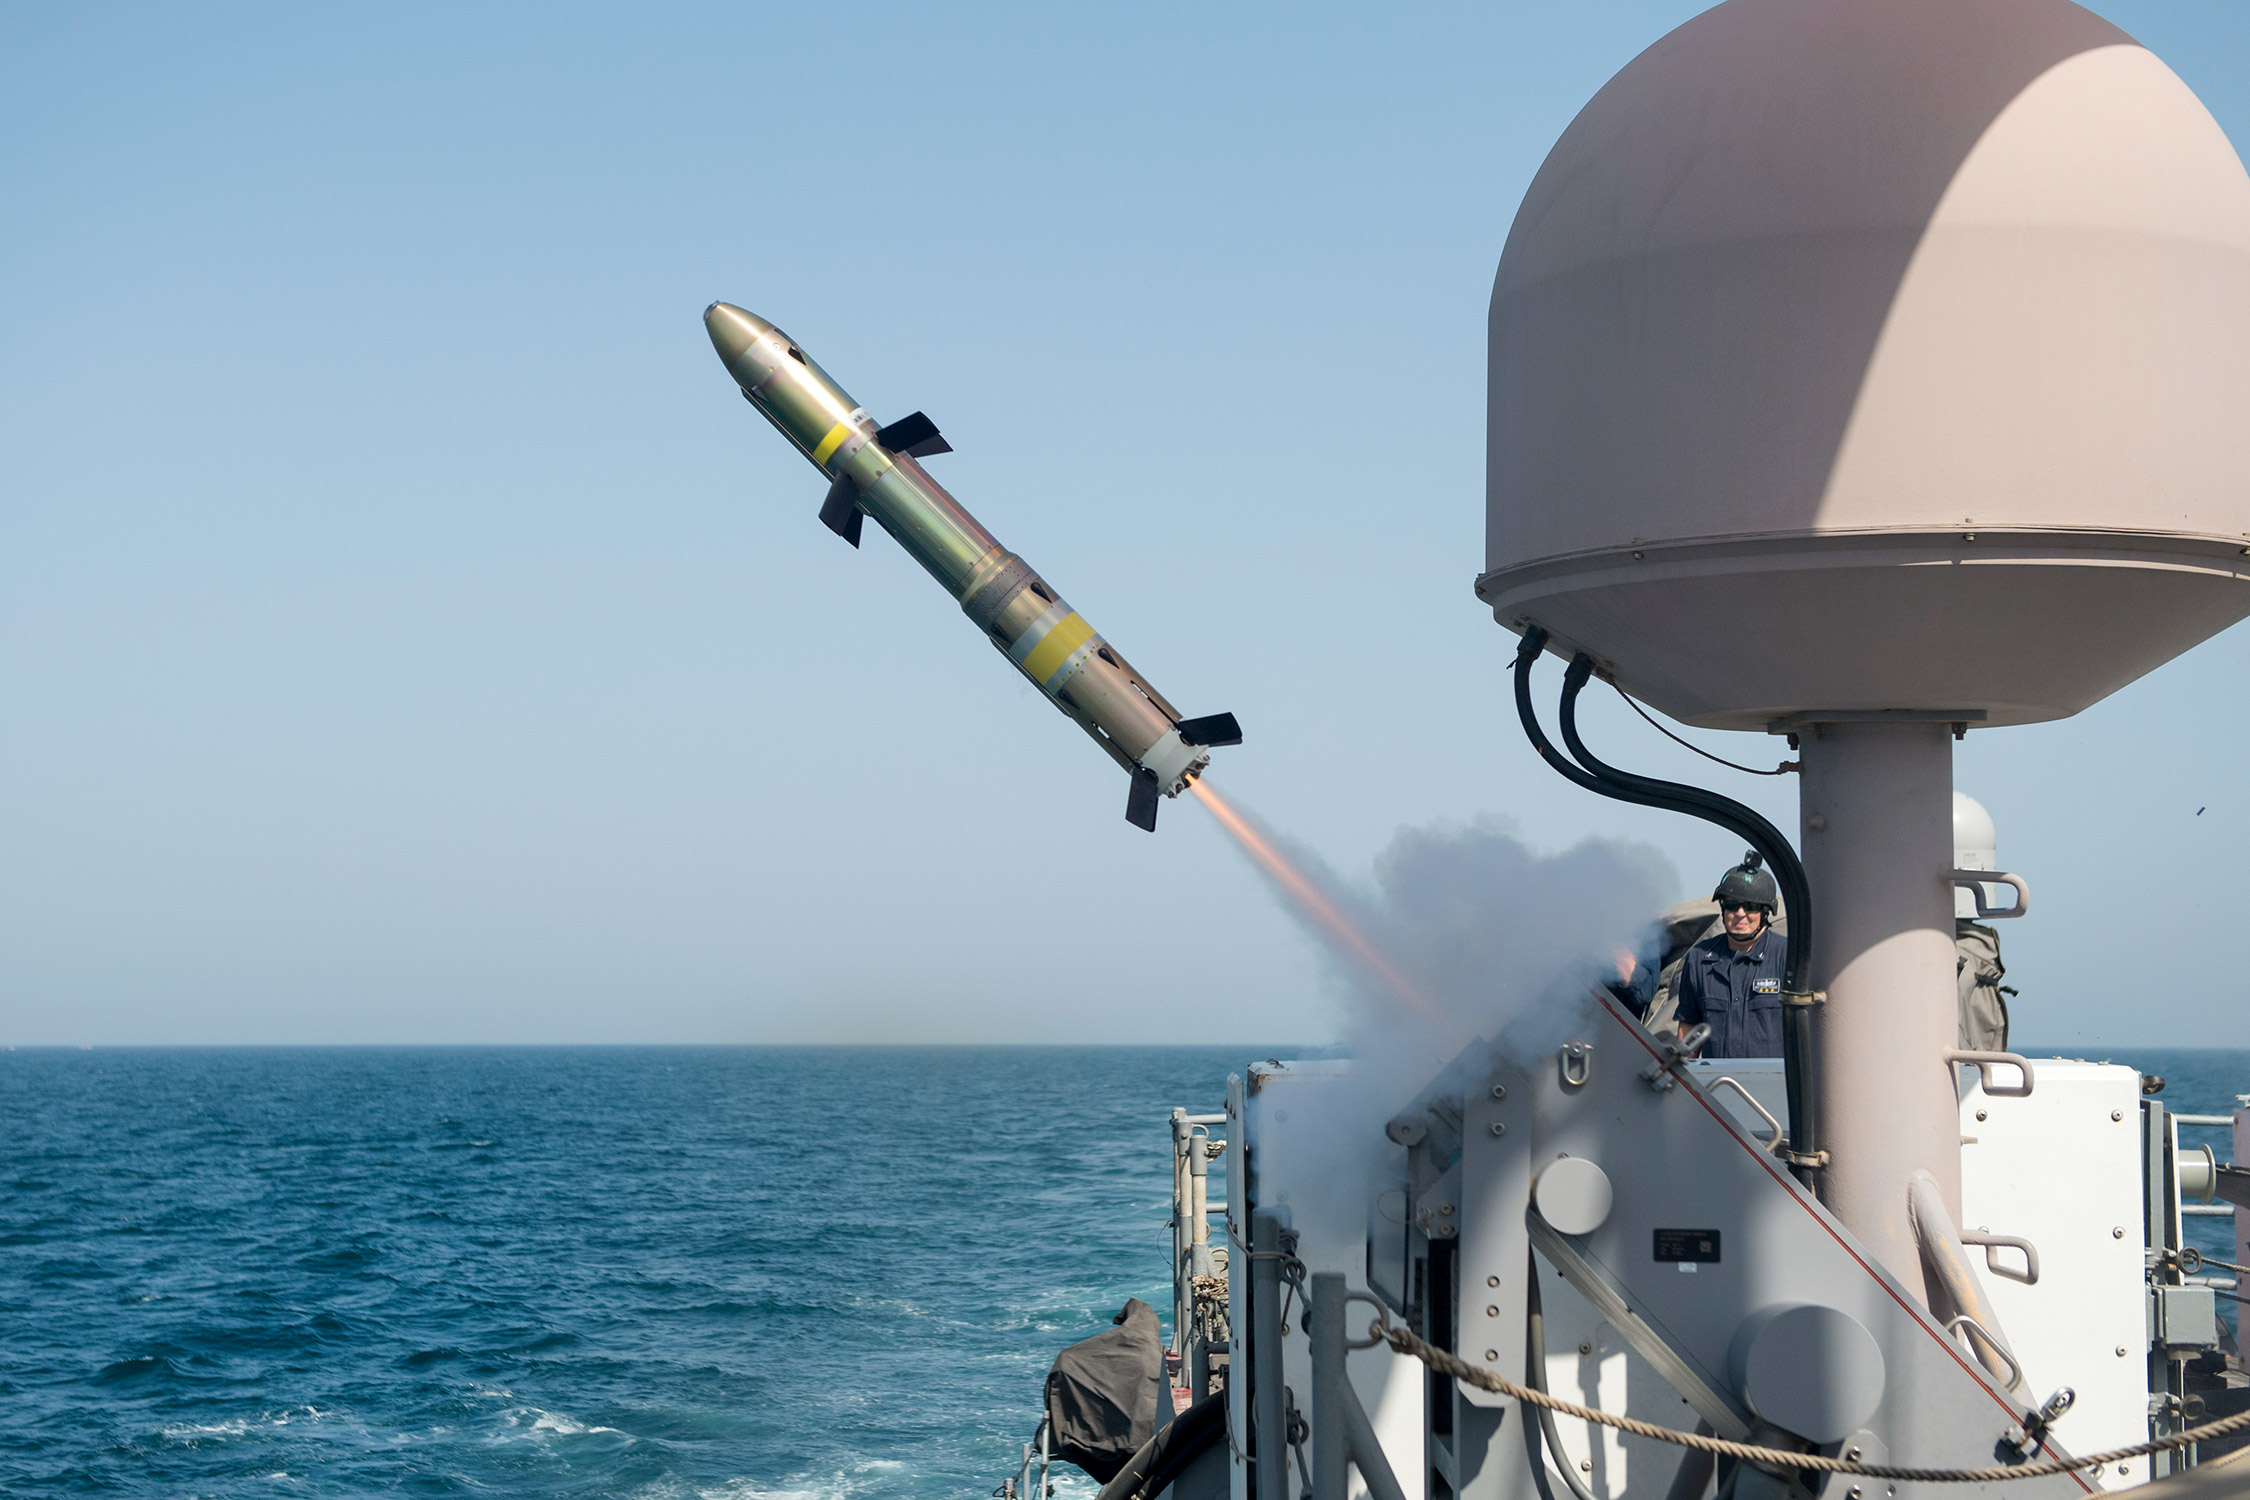 AGM-176 Griffin missile firing